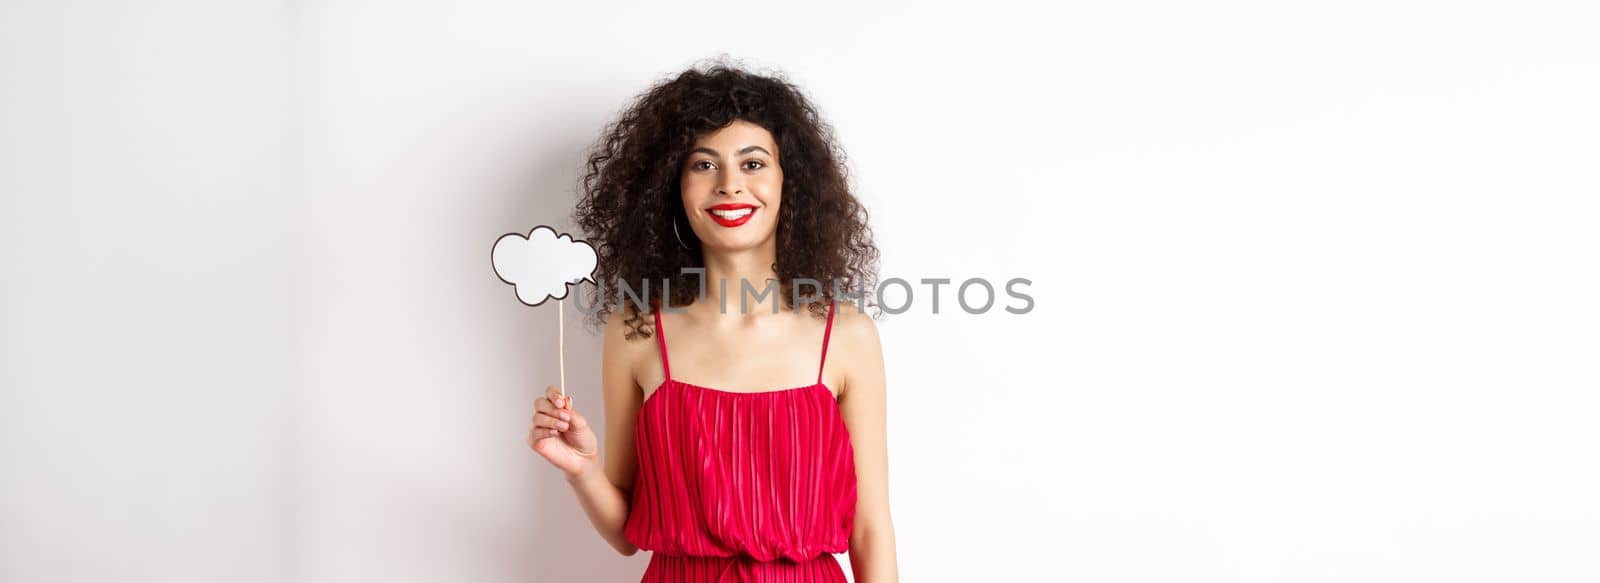 Happy stylish woman with curly hair, beauty makeup, holding comment cloud on stick and smiling, standing in red dress on white background.